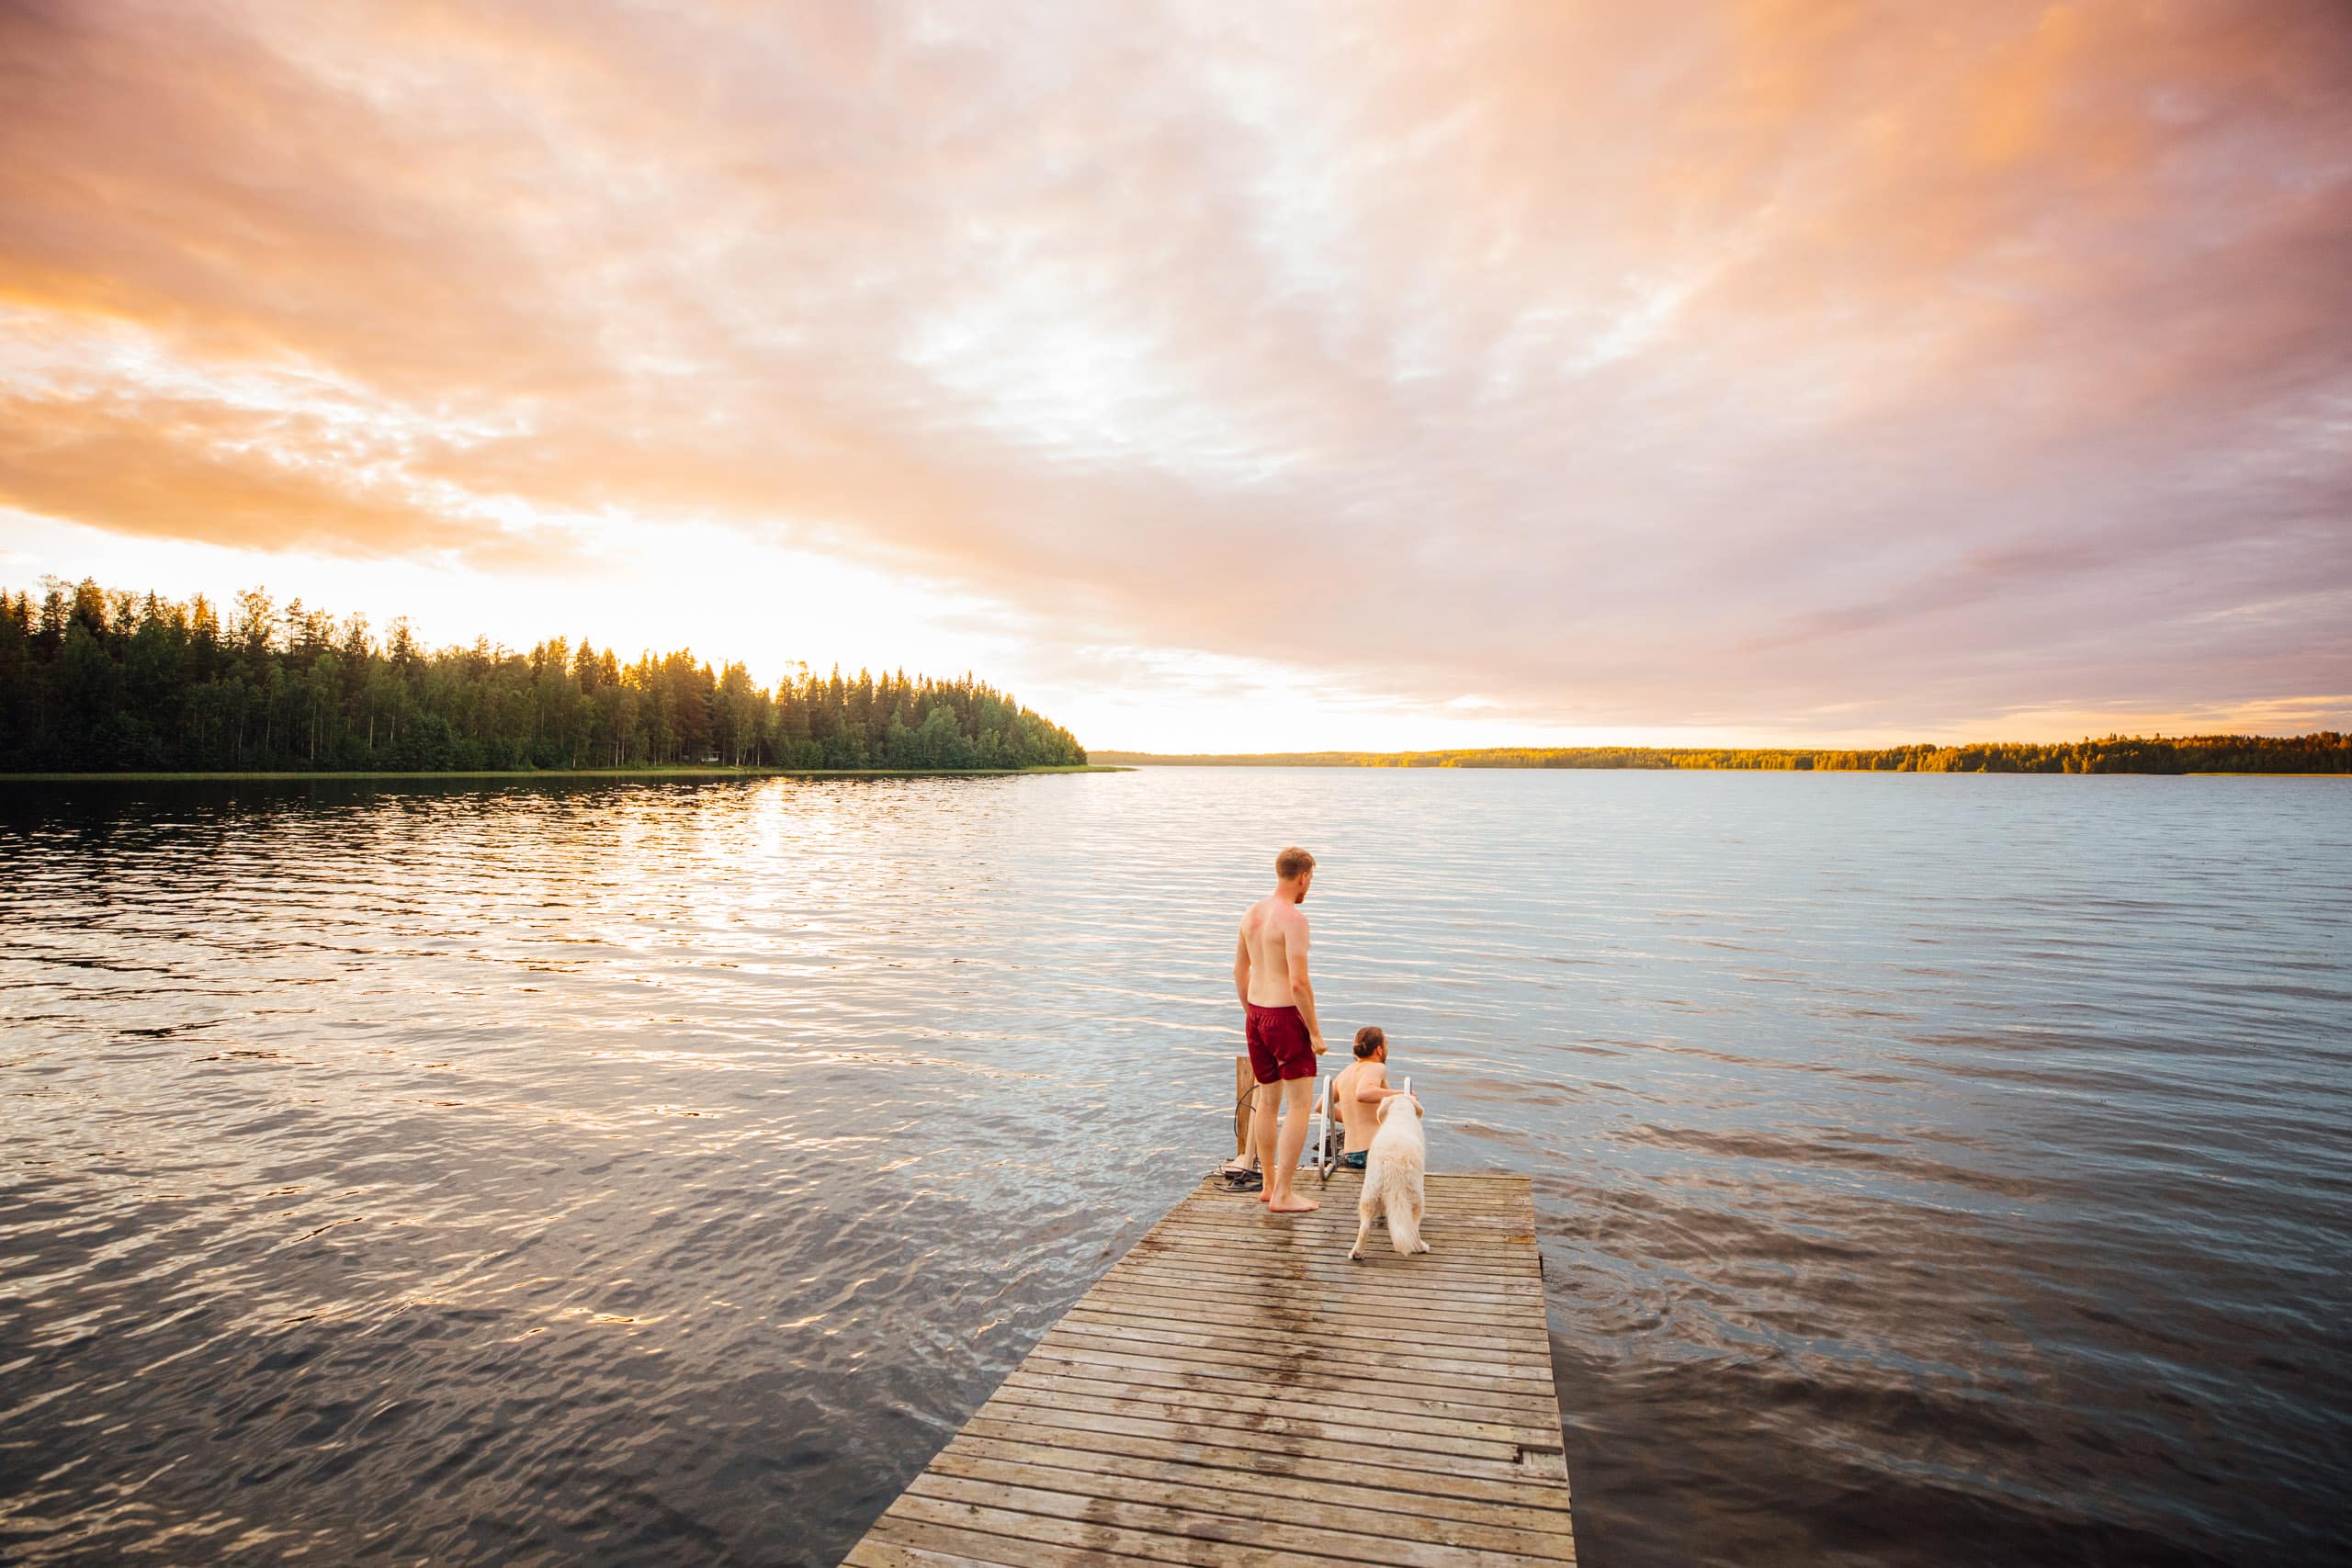 Two persons and a dog on a wooden deck over a lake.